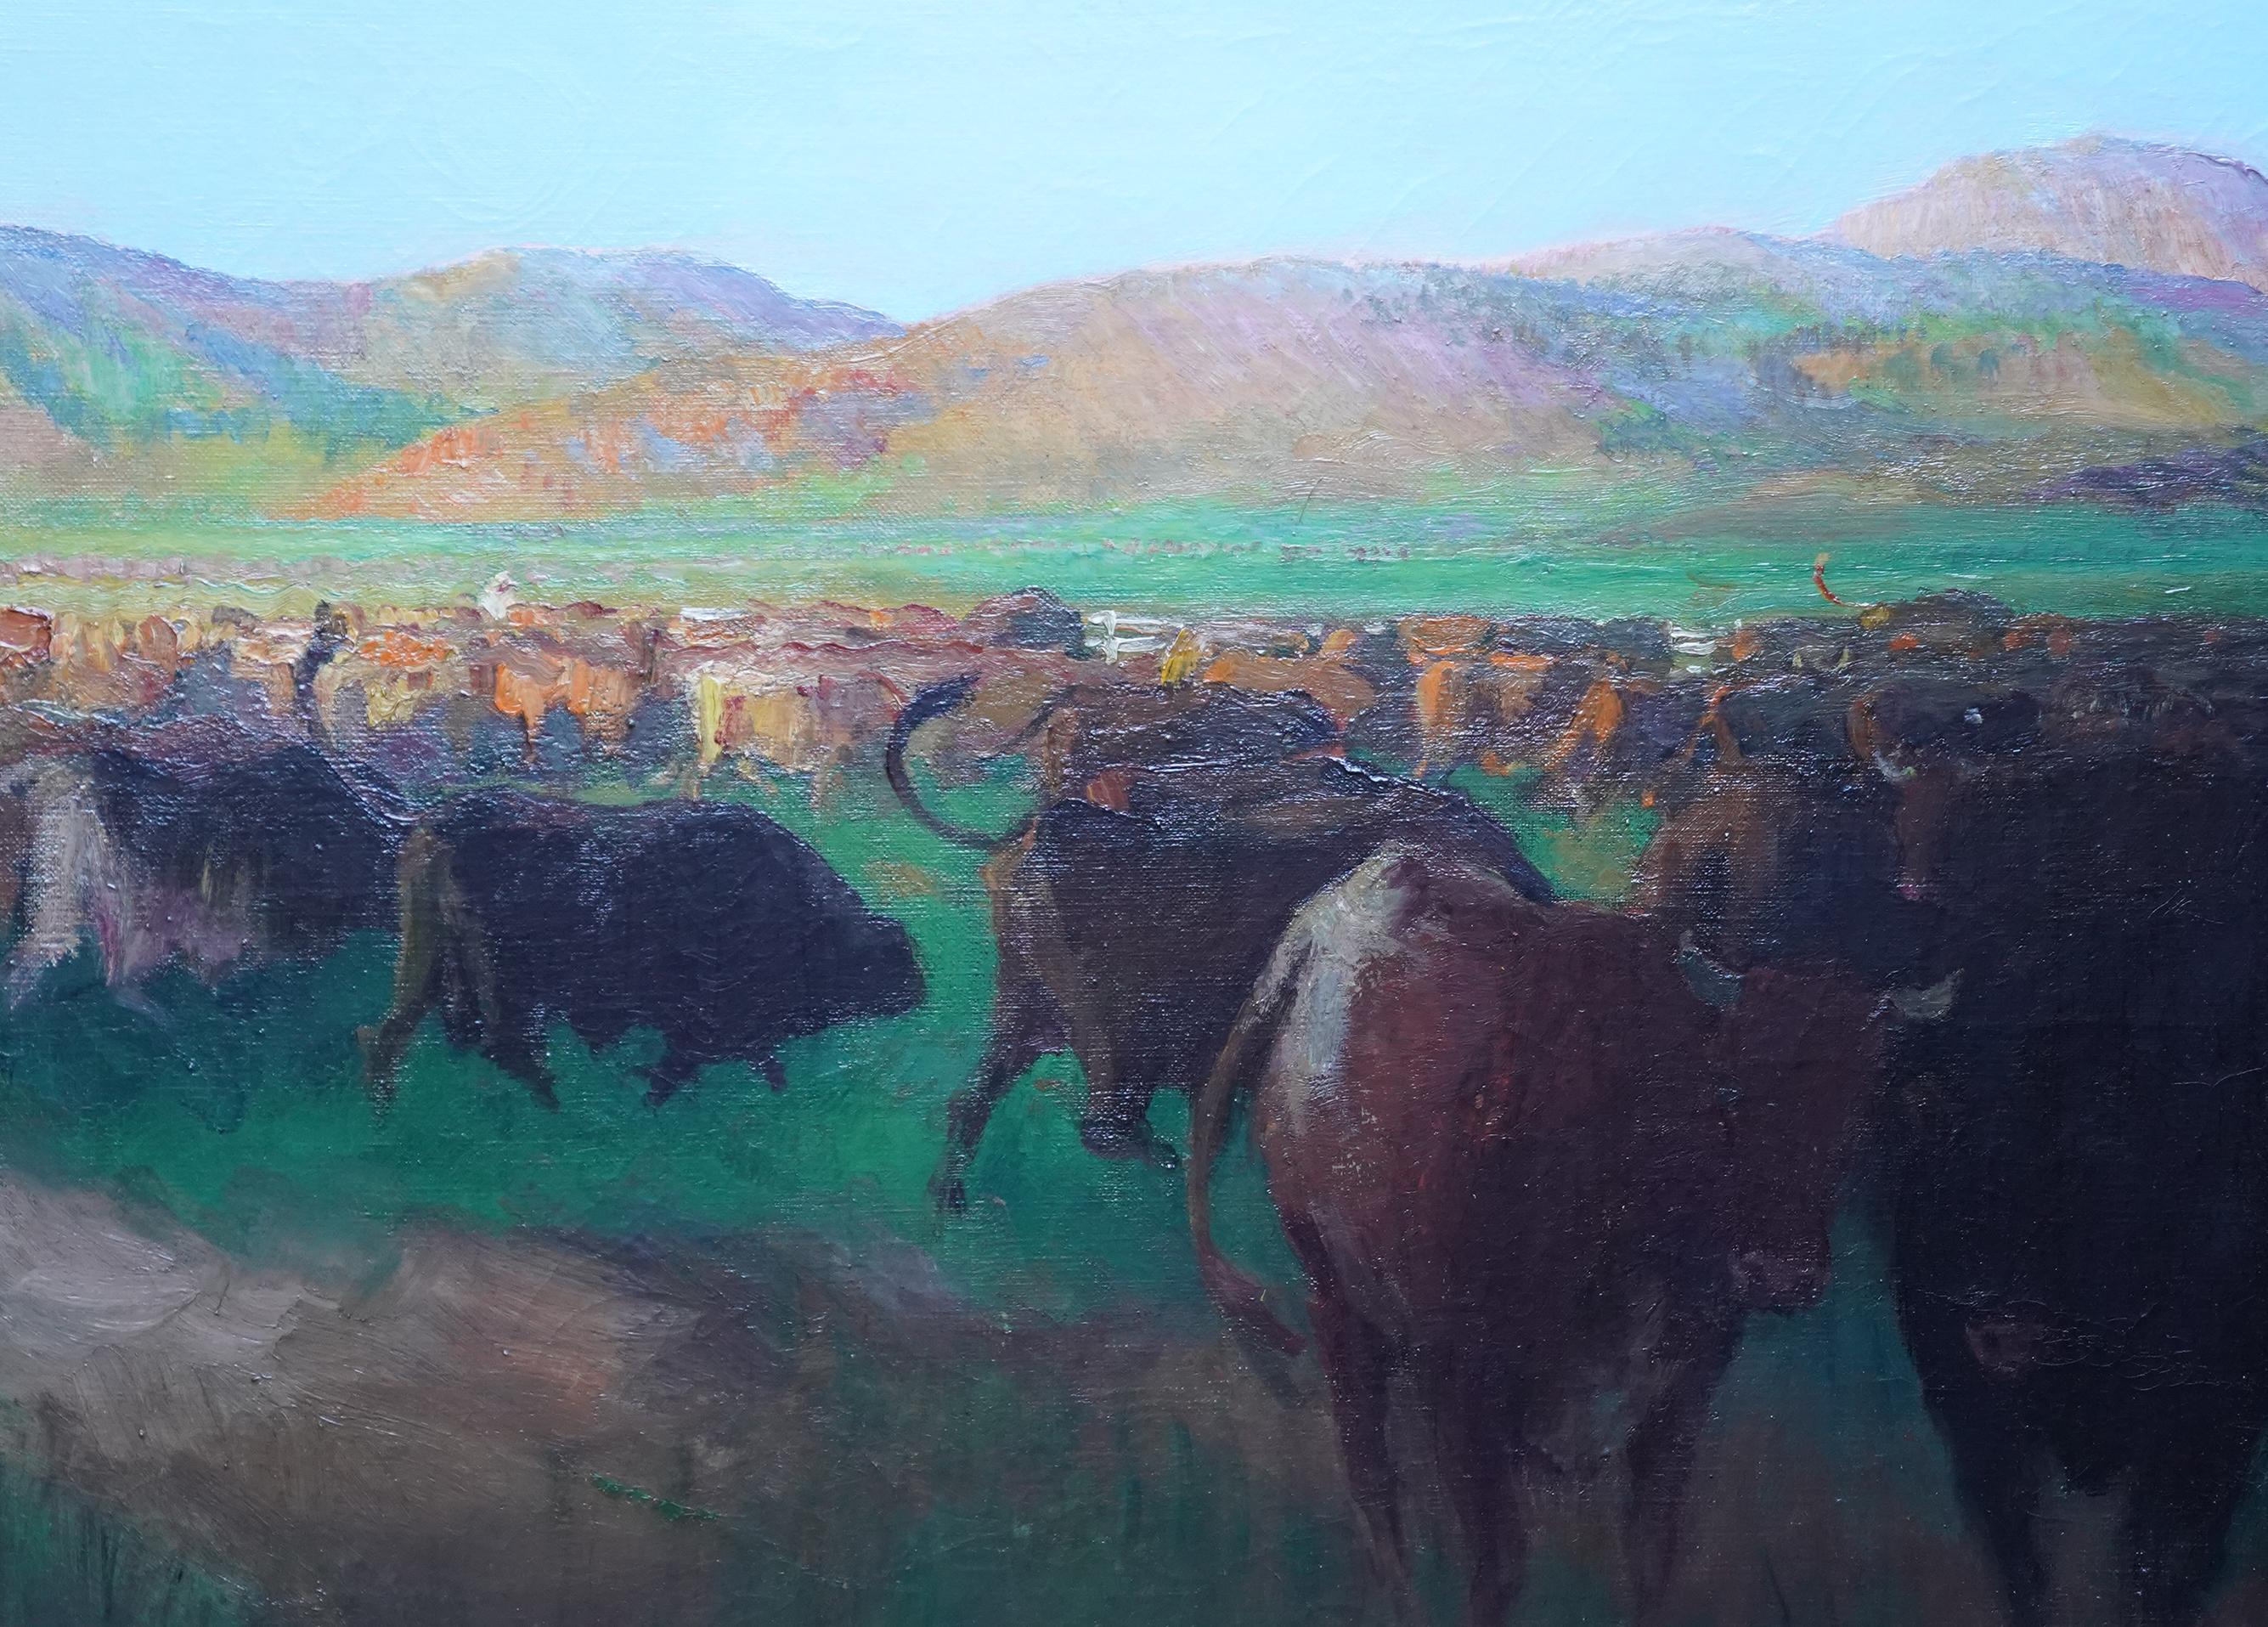 Cattle in a Landscape North Africa - British 20s Post Impressionist oil painting - Black Landscape Painting by Spencer Pryse